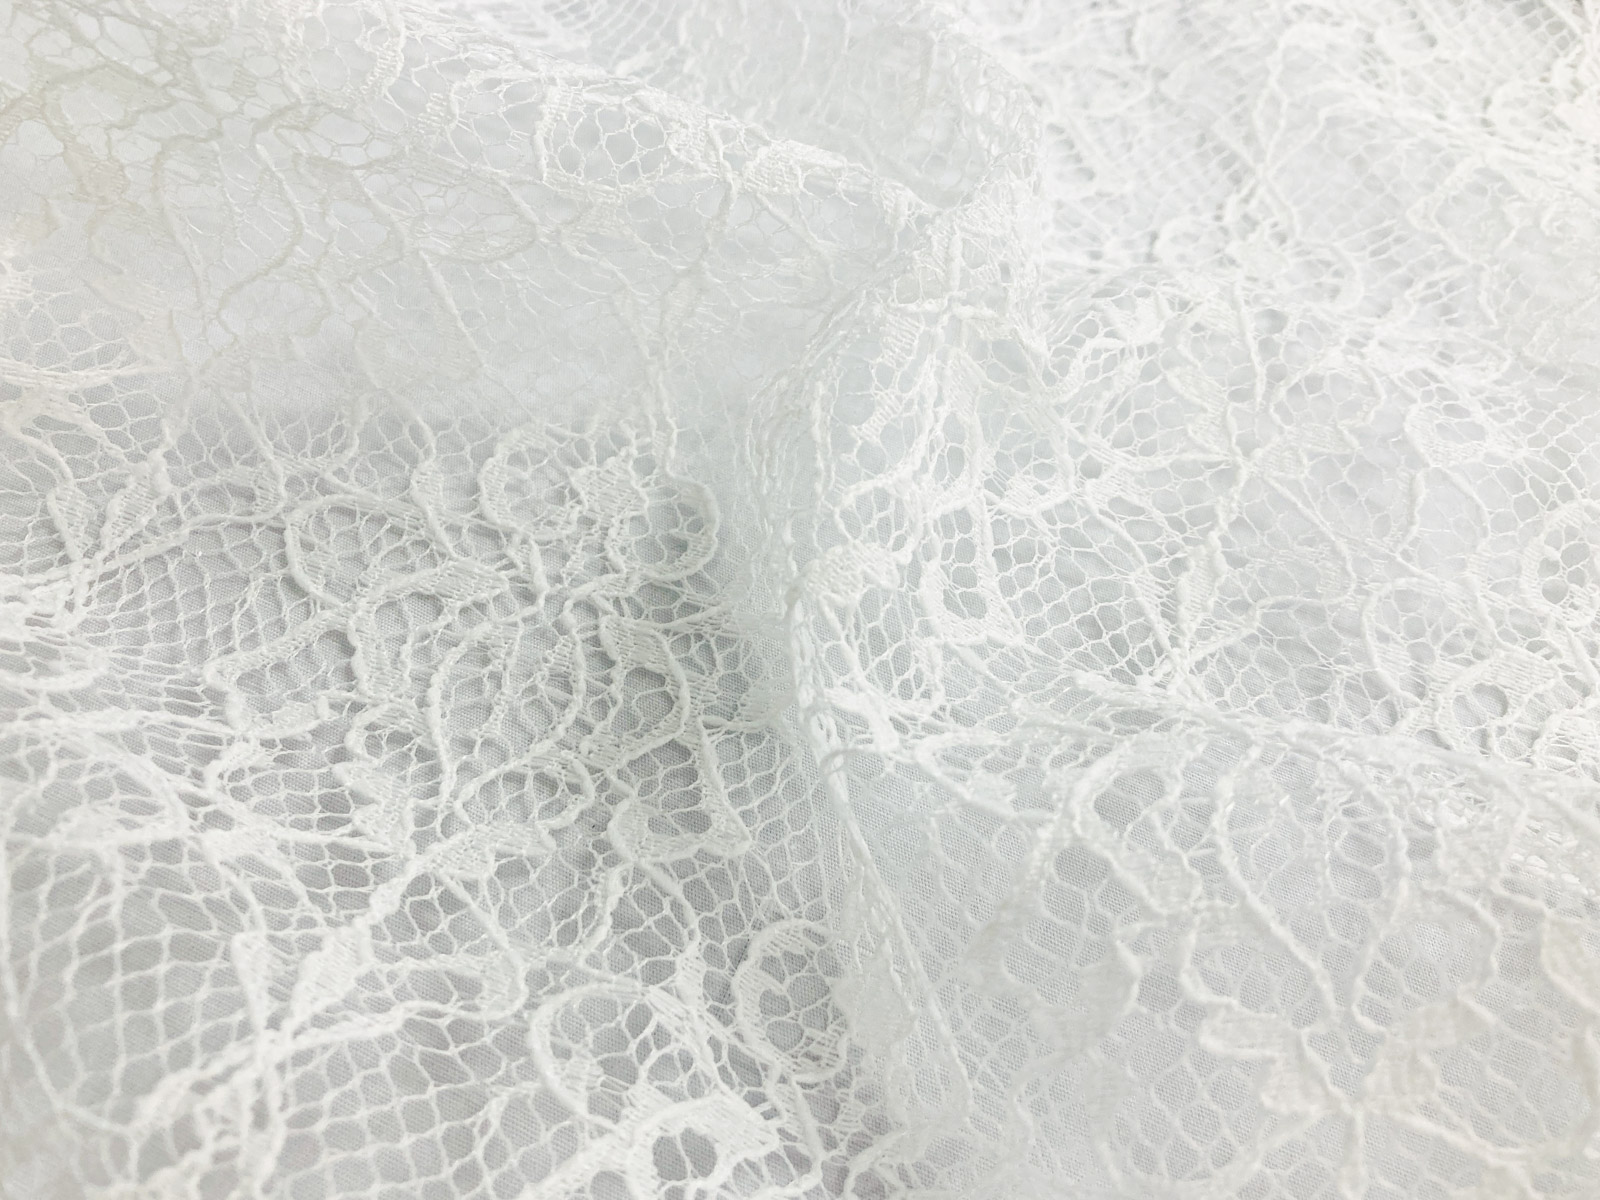 KKF2744 [ D/#8 ]Dyed Polyester Raschel Lace